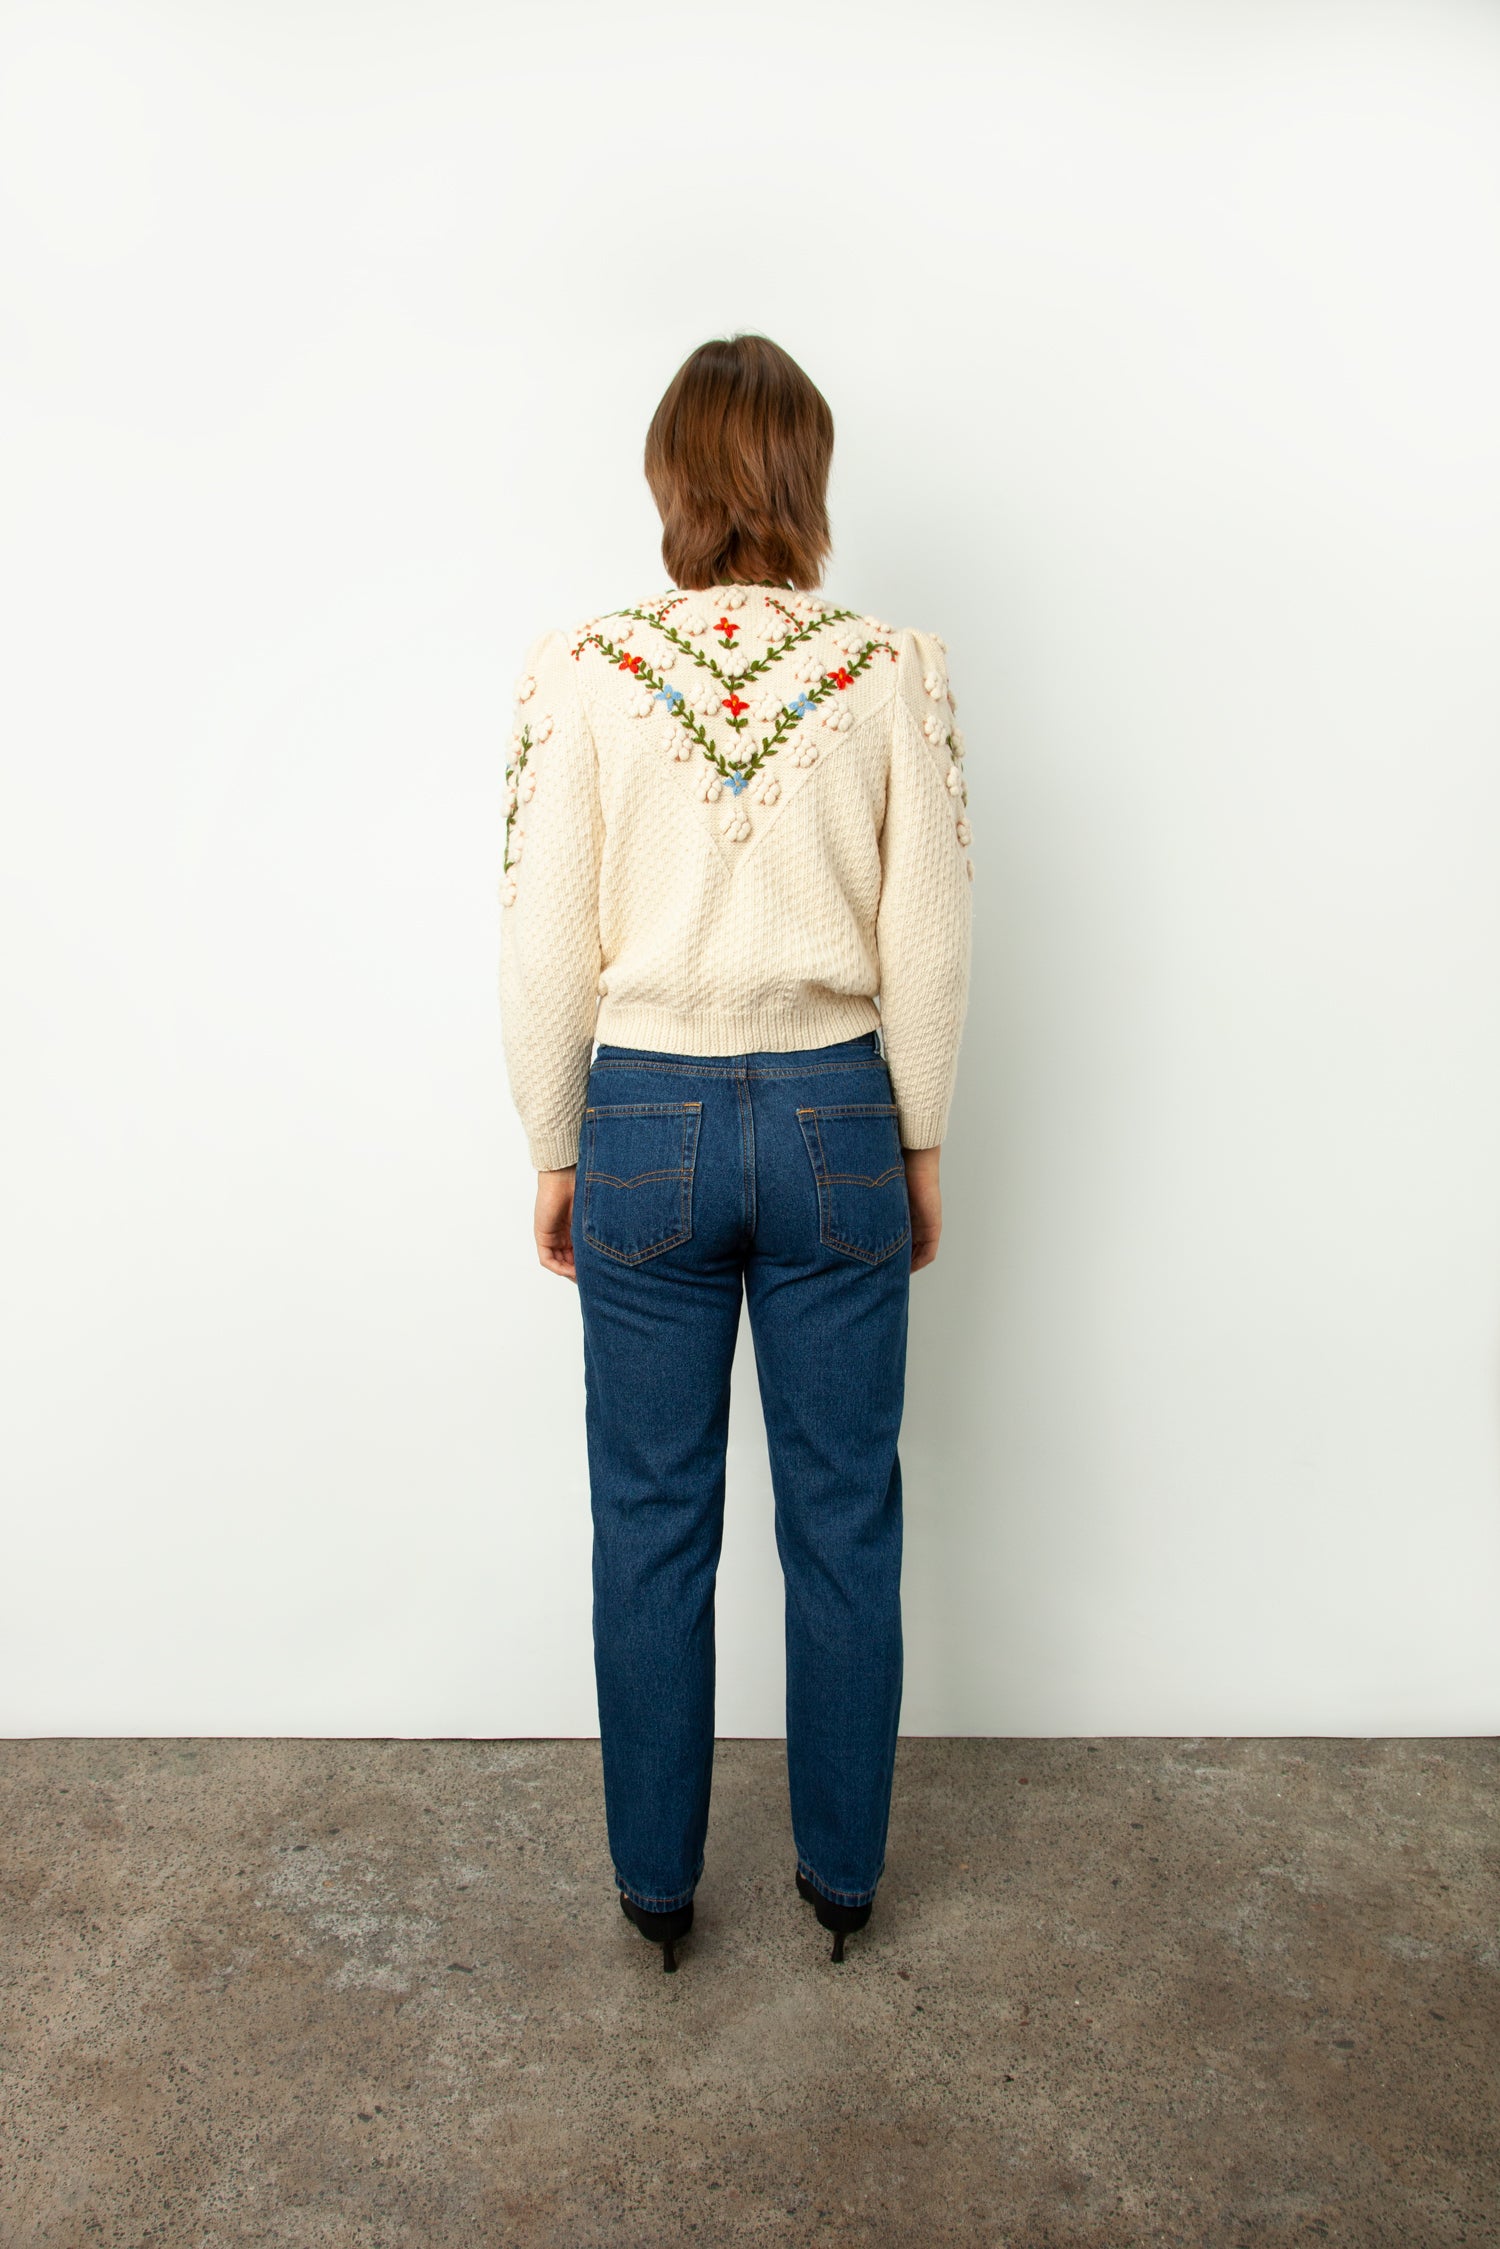 1950s HAND EMBROIDERED CARDIGAN